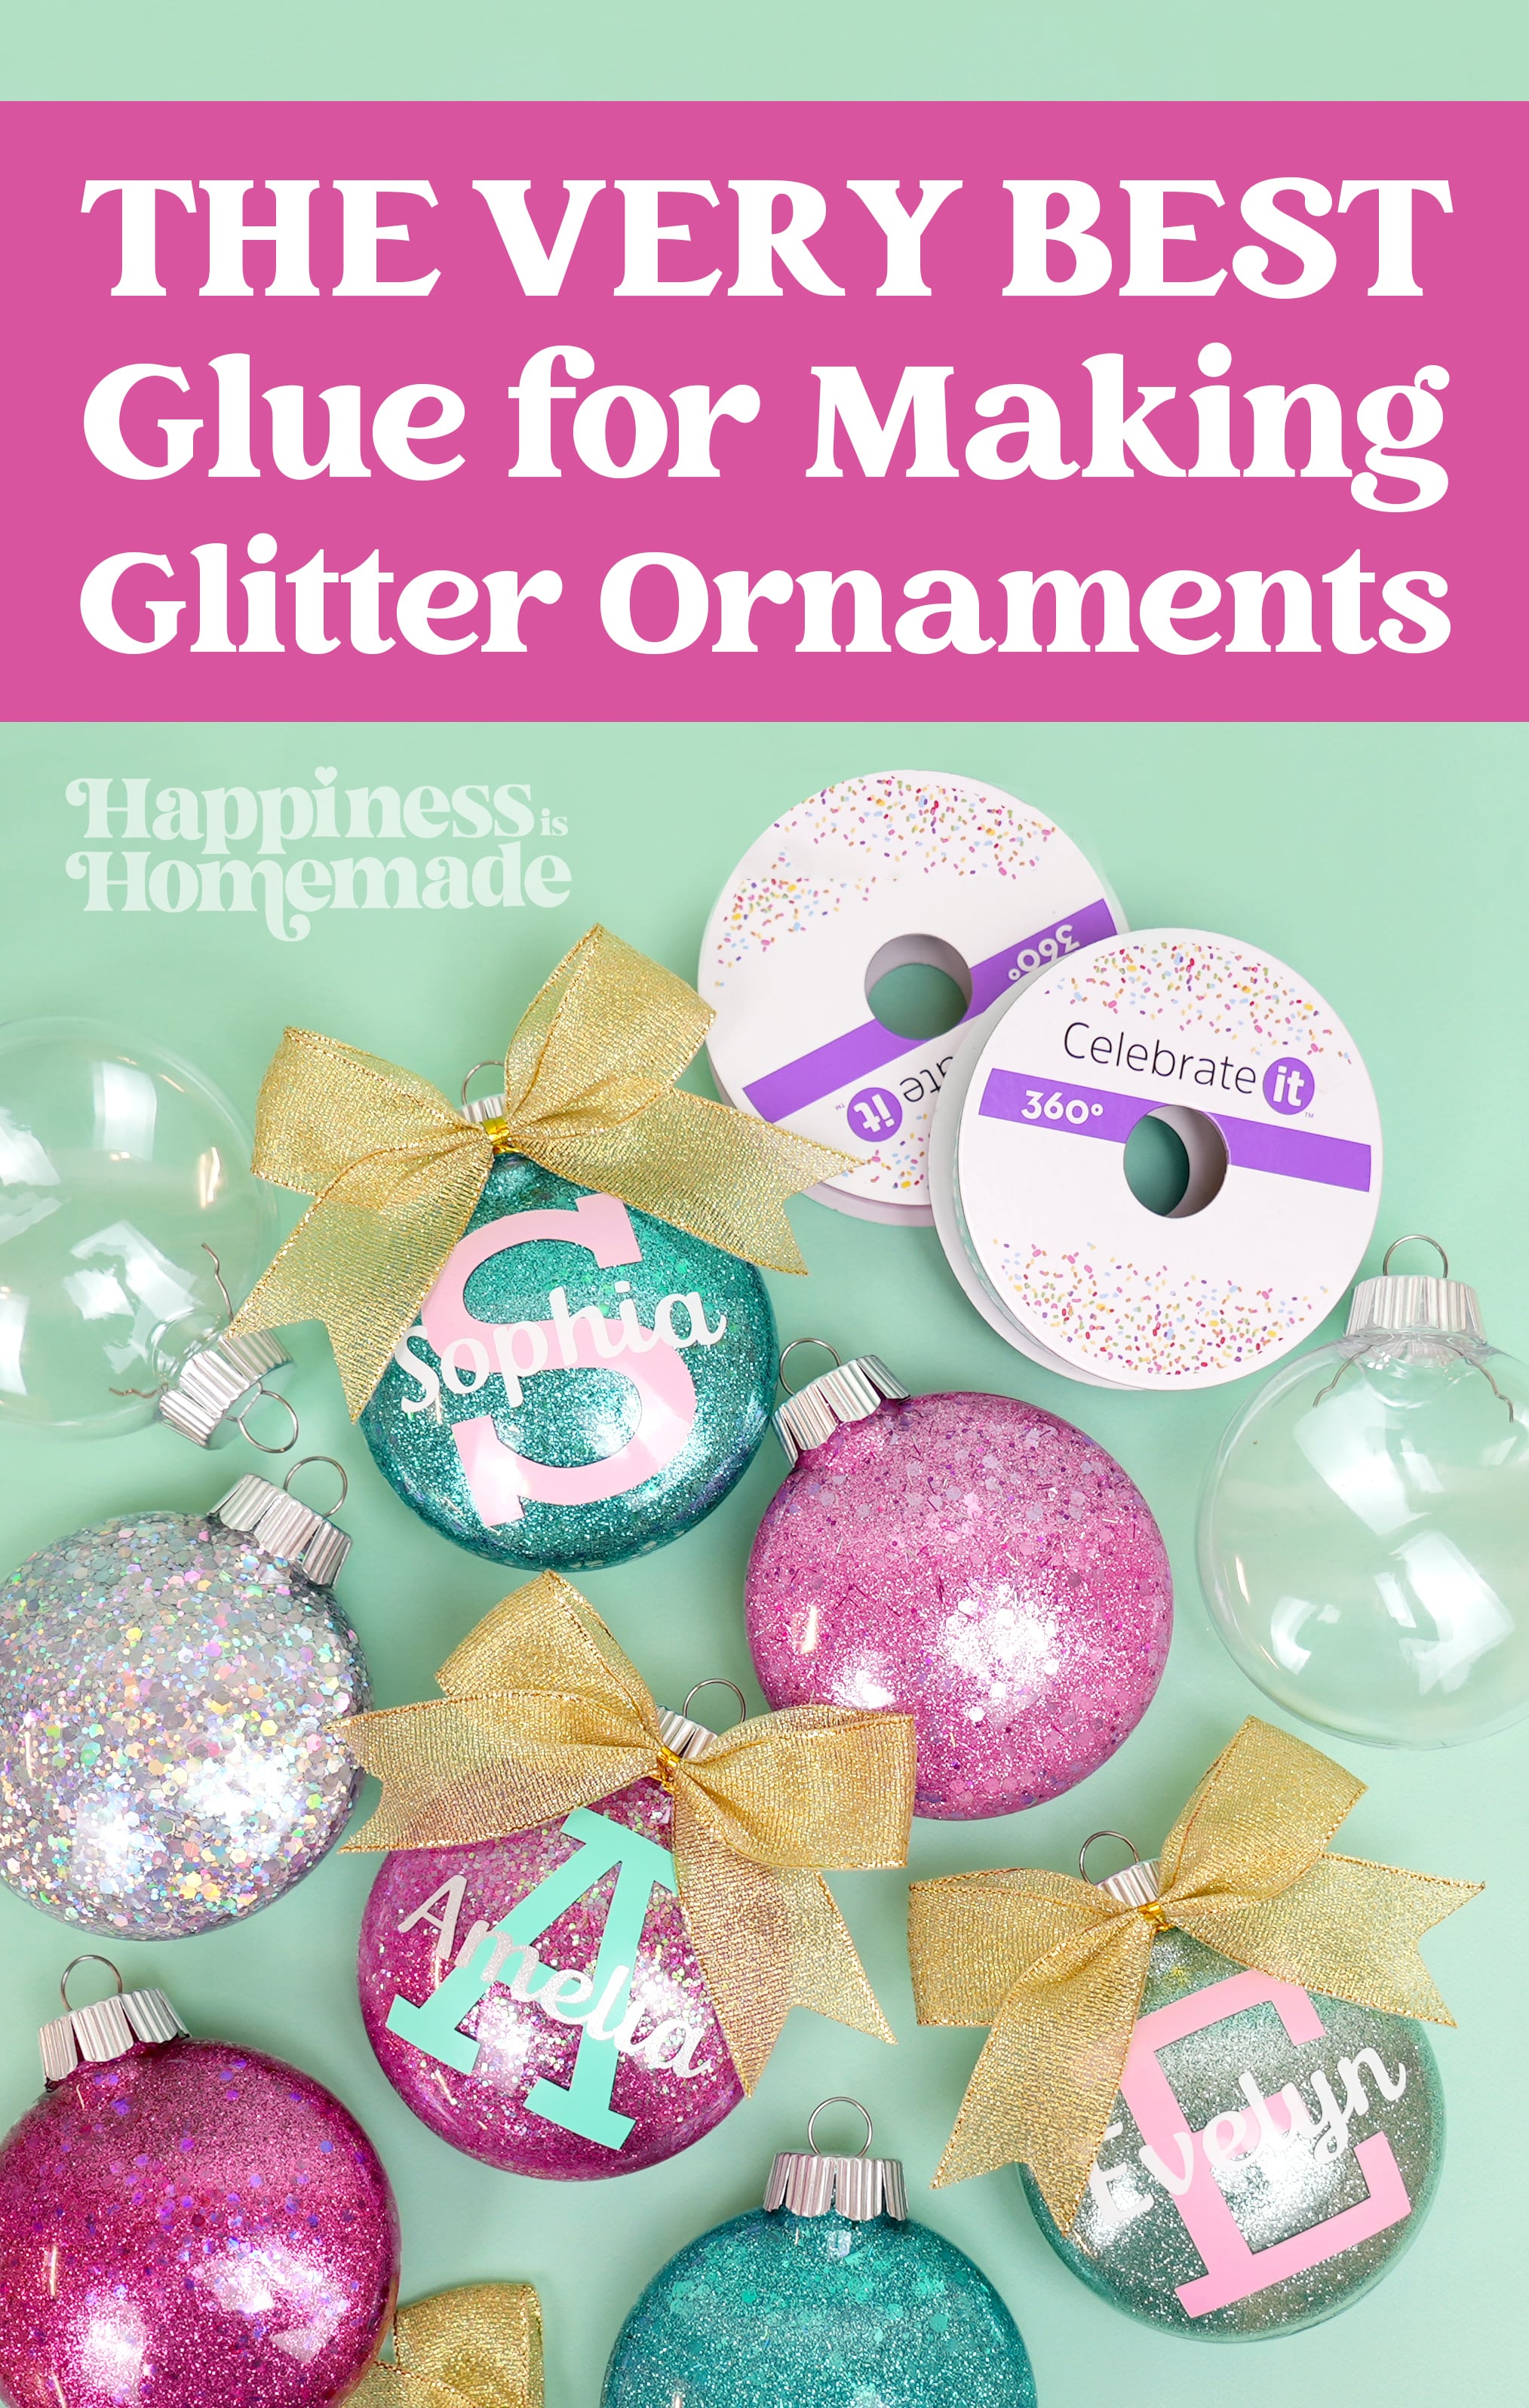 Christmas Ornaments for DiY Craft Kits Graphic by